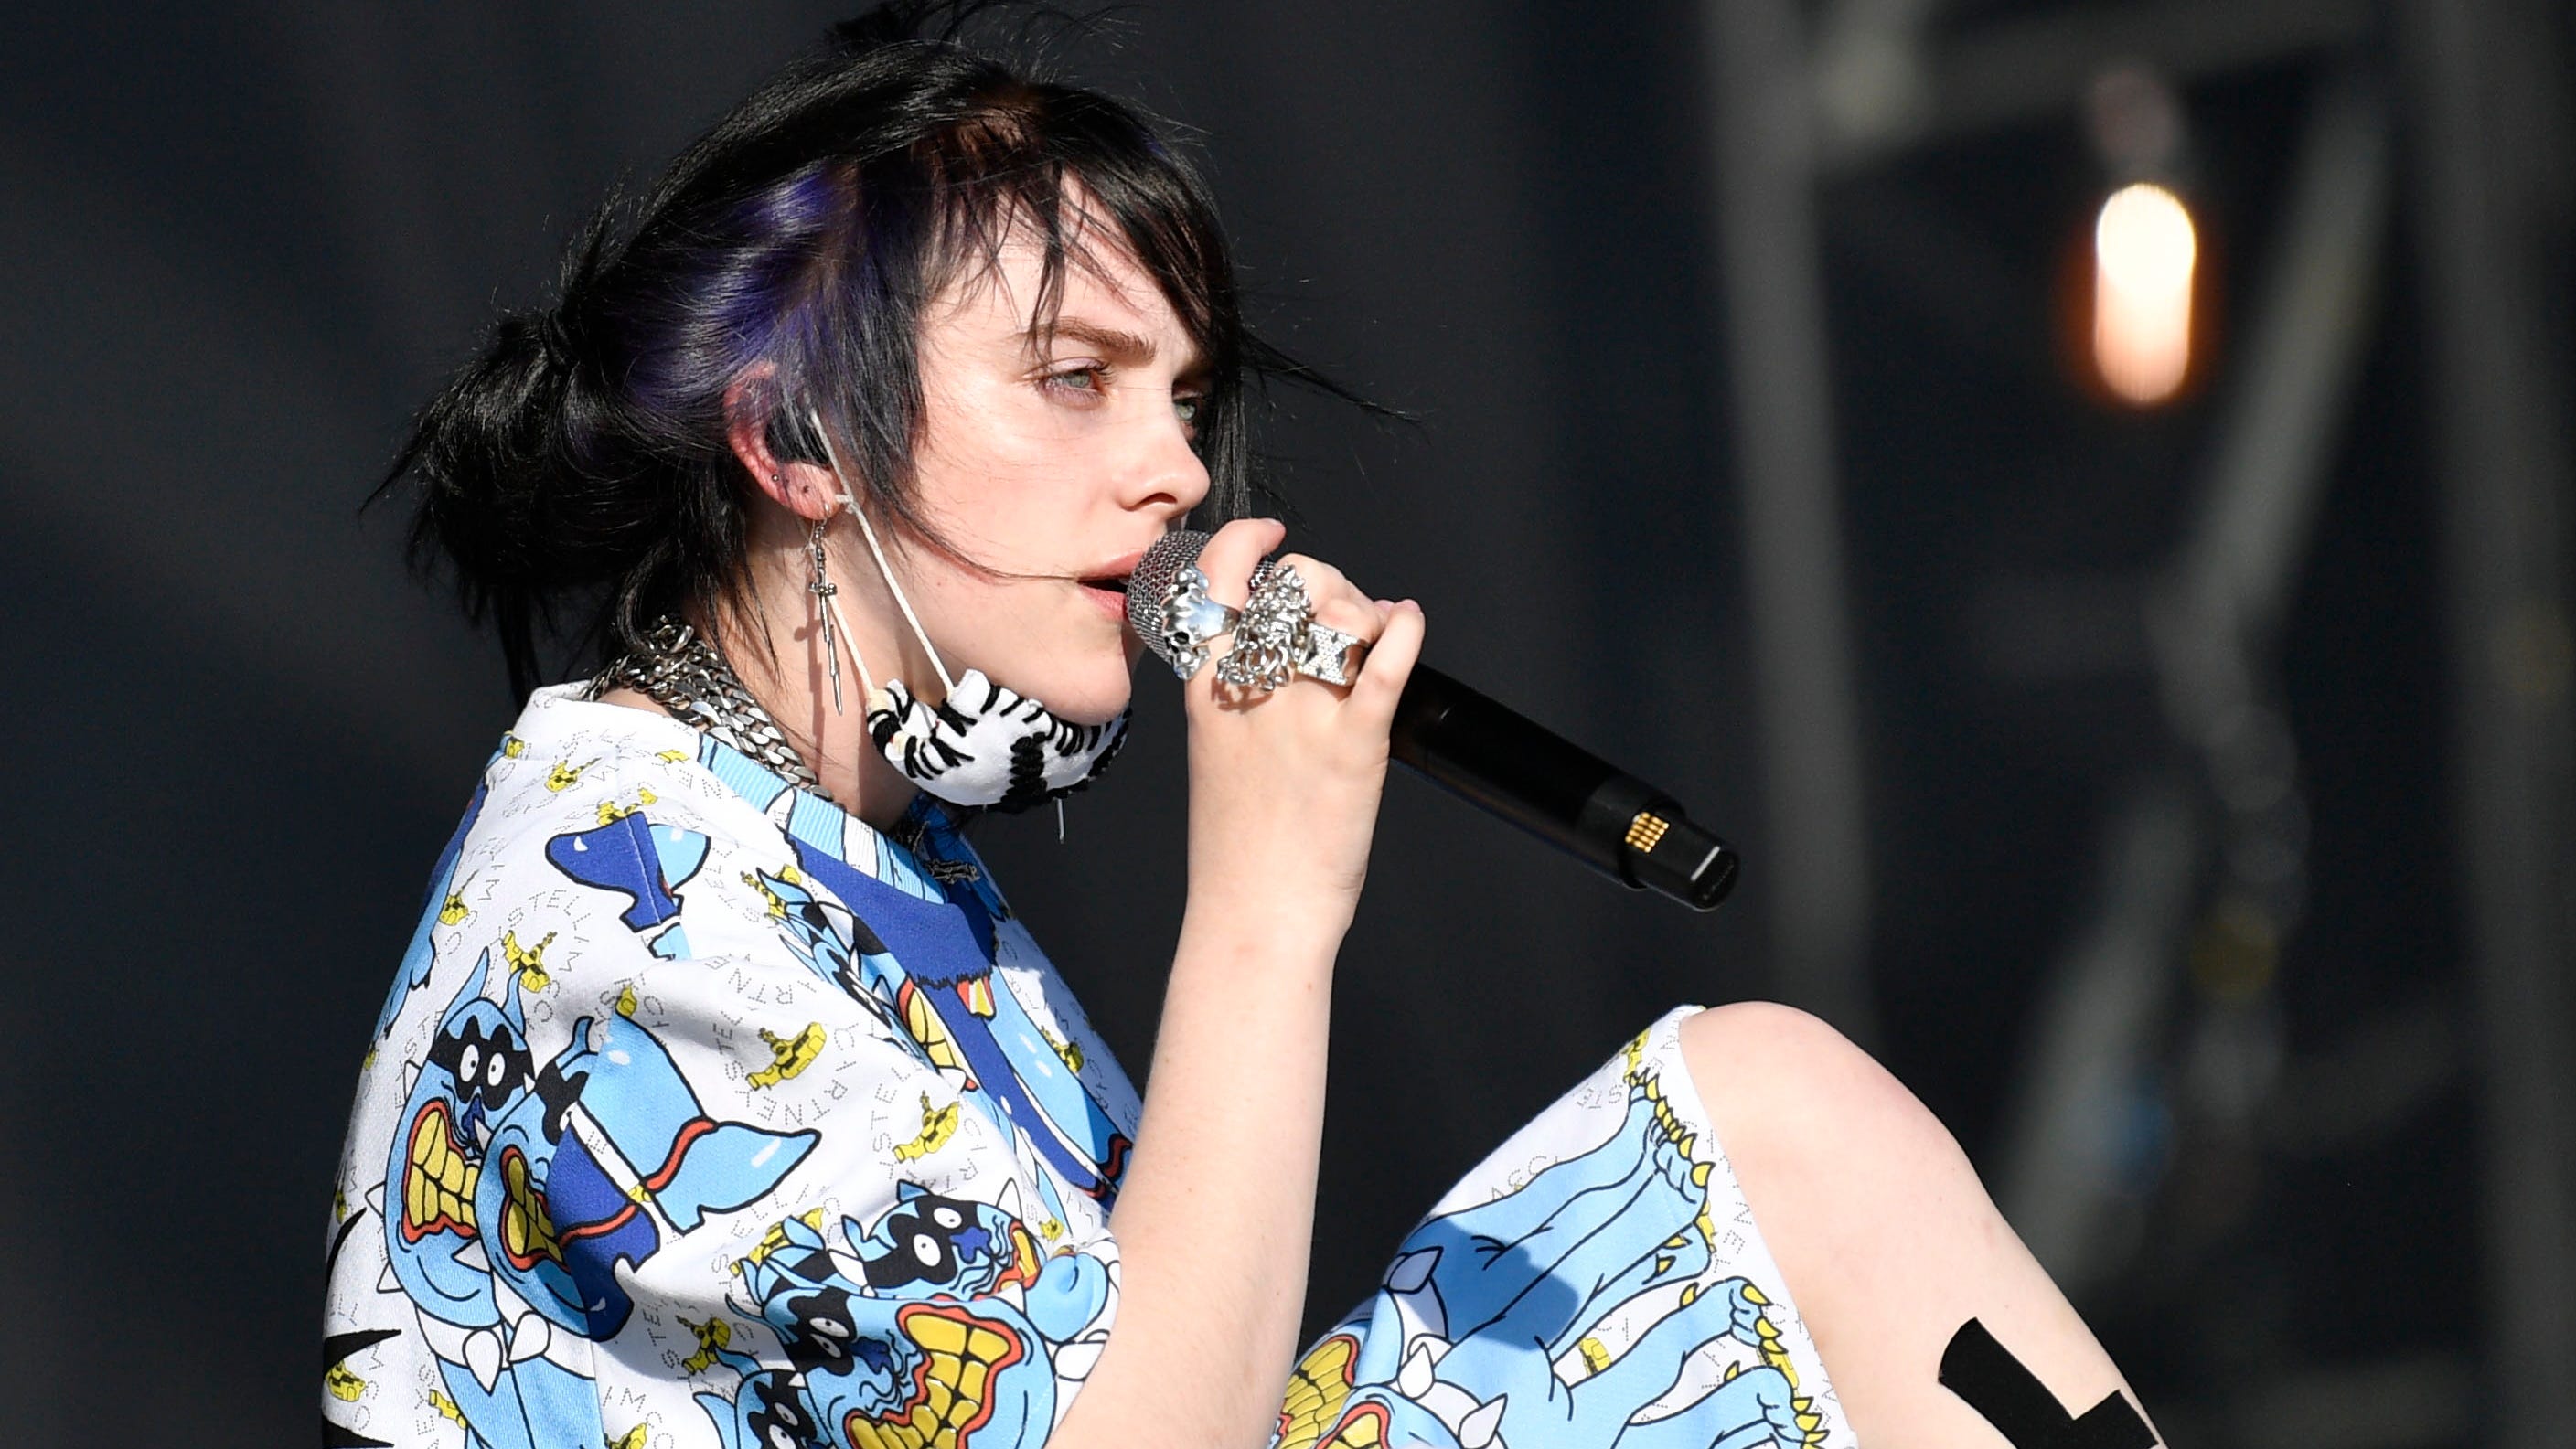 diane middlemiss recommends billie eilish naked pic